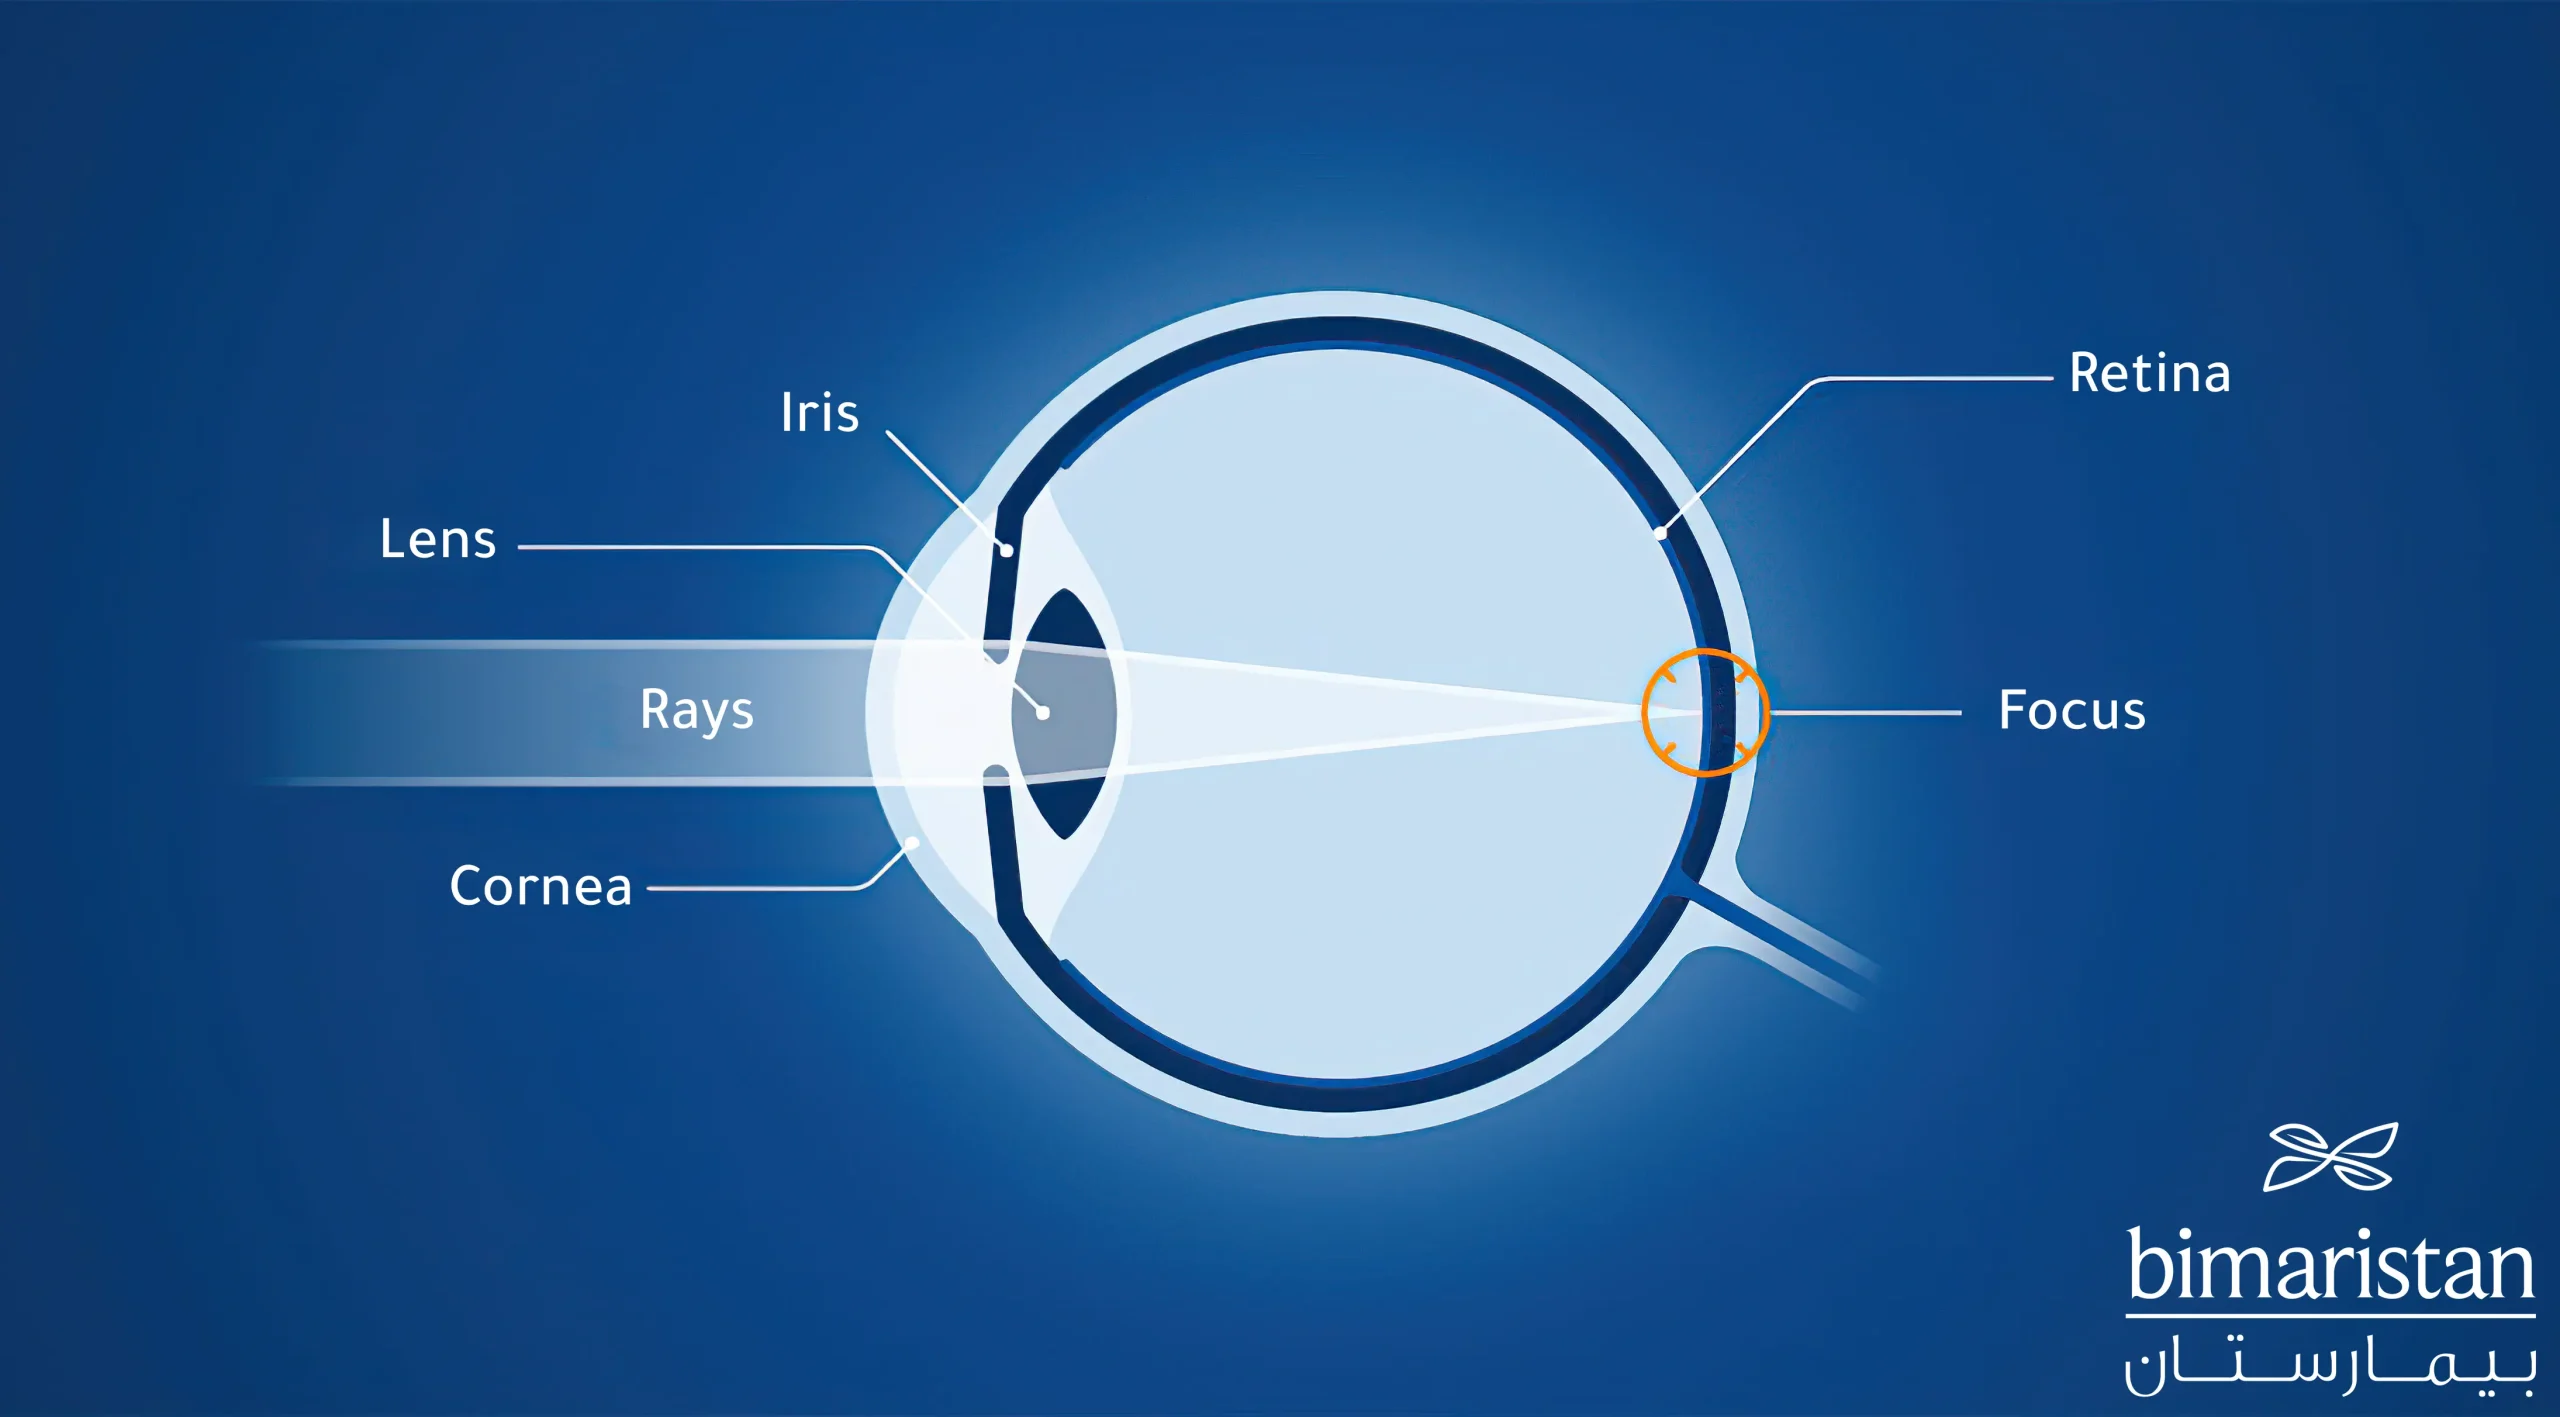 This Picture Illustrates The Process Of Natural Vision And How Light Rays Enter And Refract Until The Shadow Falls Perfectly On The Retina. Lasik Surgery In Turkey Aims To Correct Refractive Errors Of These Light Rays To Provide Clear And Sharp Vision.